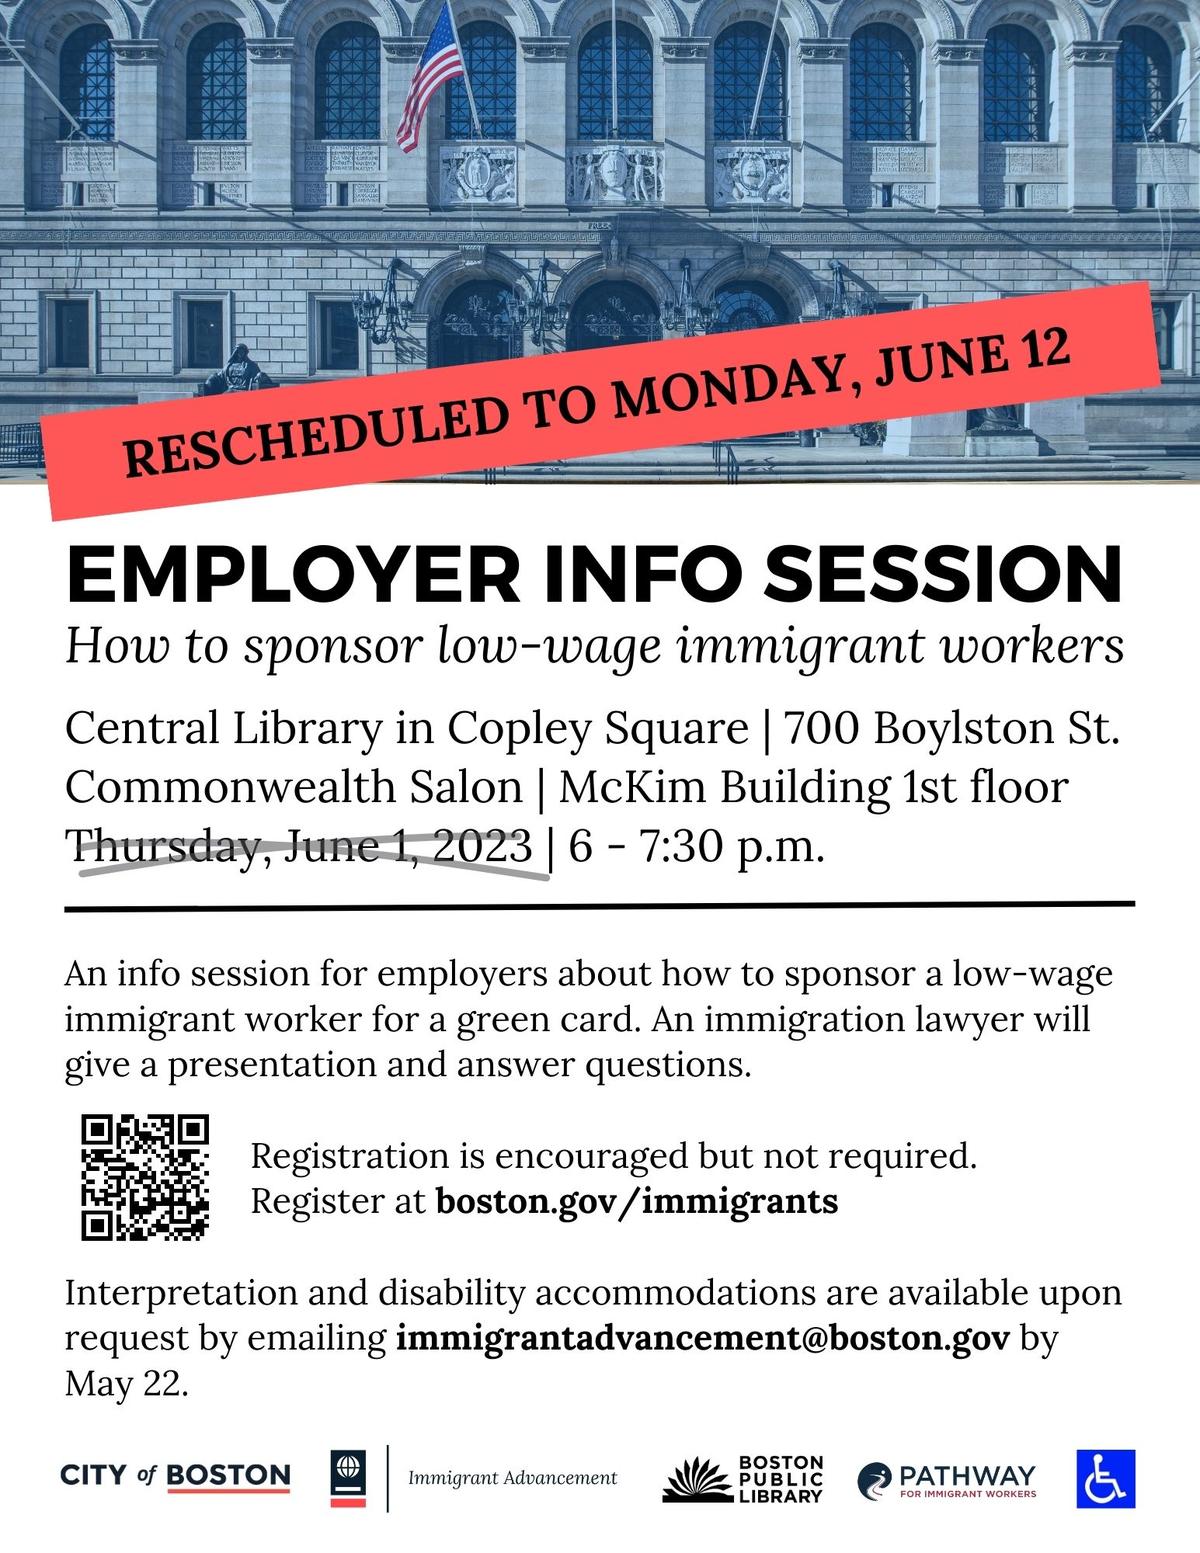 Flyer for Employer Info Session on June 12 from 6-7:30pm at Central Library in Copley Square. It is for How to sponsor low-wage immigrant workers. Please register at the link on the website.